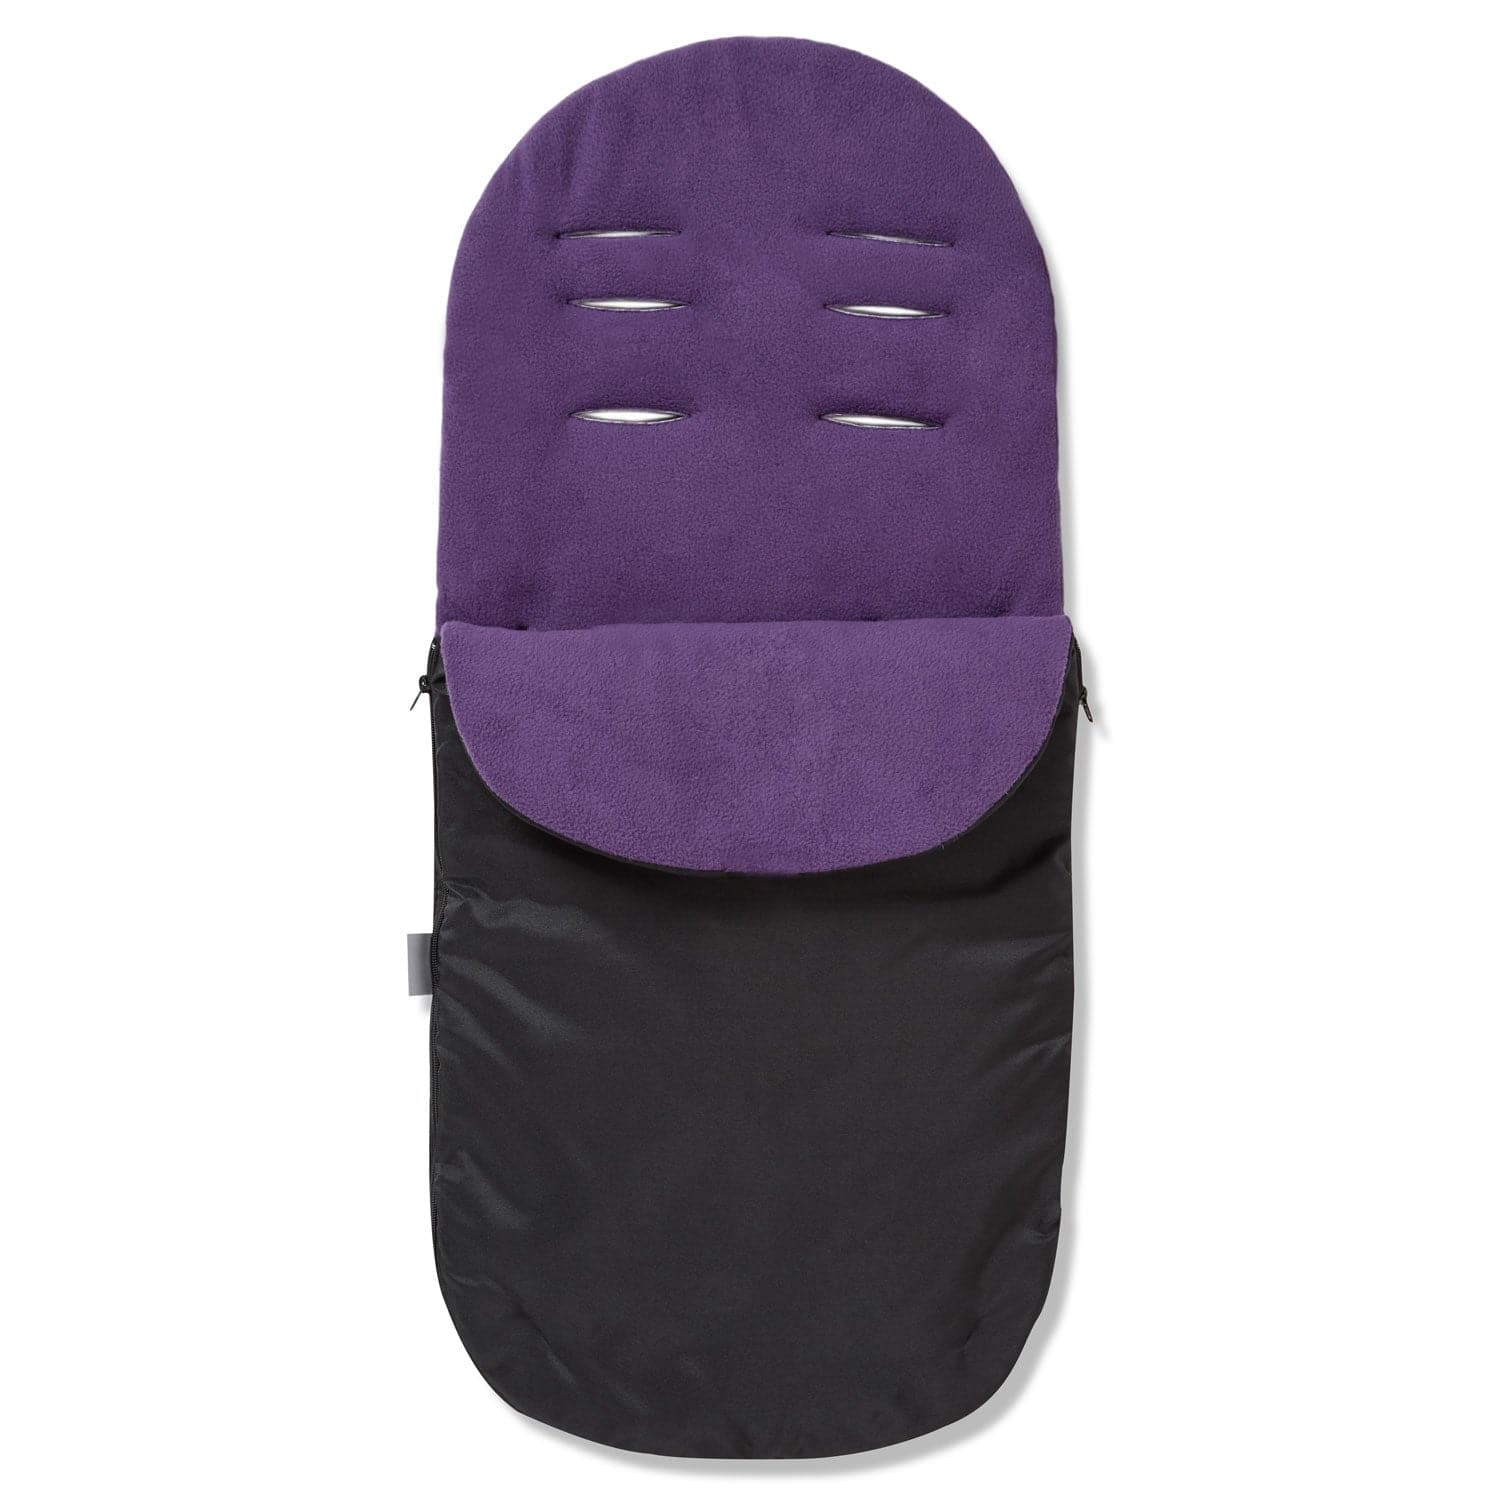 Footmuff / Cosy Toes Compatible with Safety 1st - Purple / Fits All Models | For Your Little One